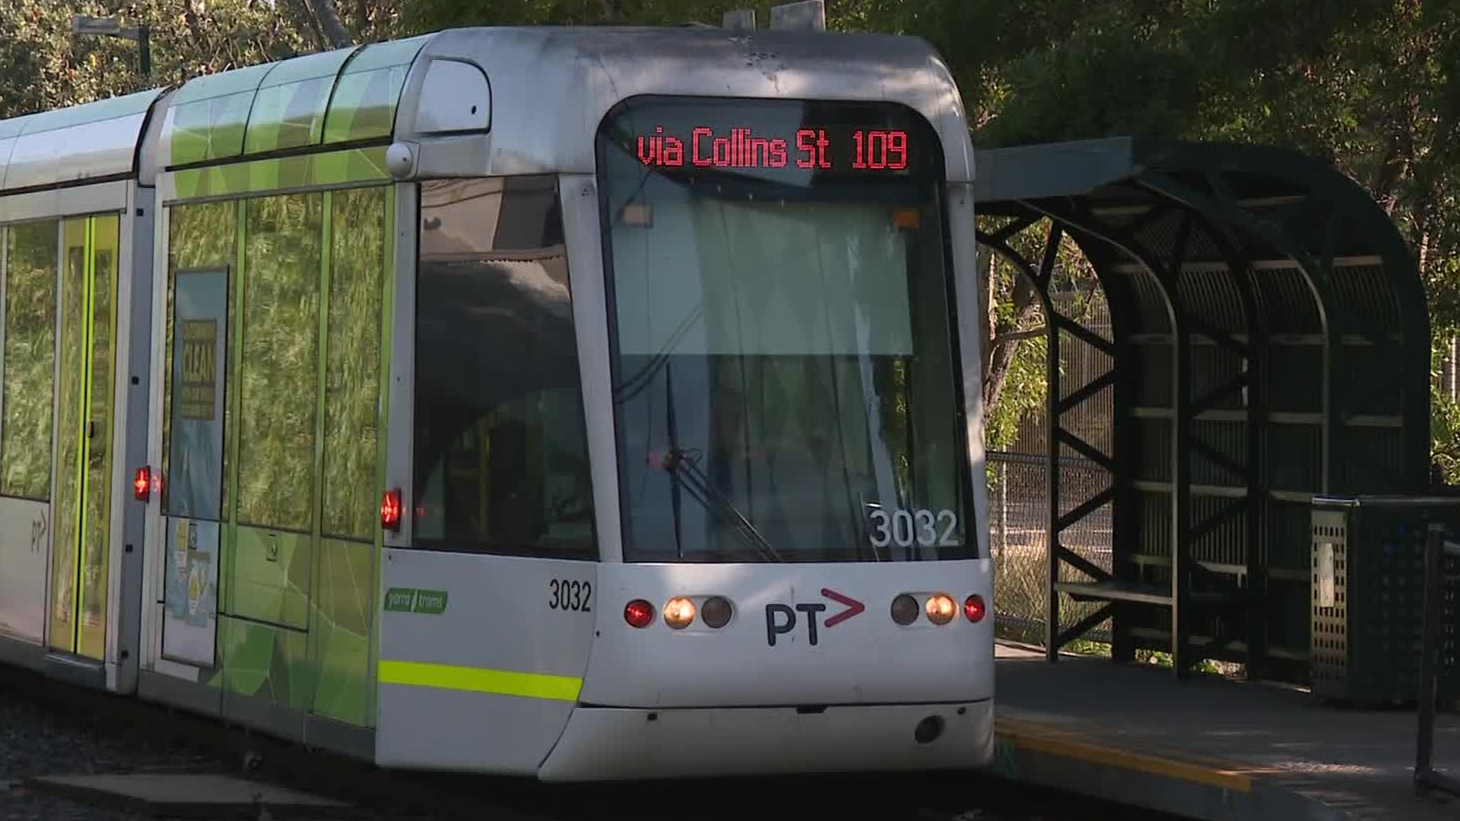 Melbourne grandmother takes legal action after tram injuries